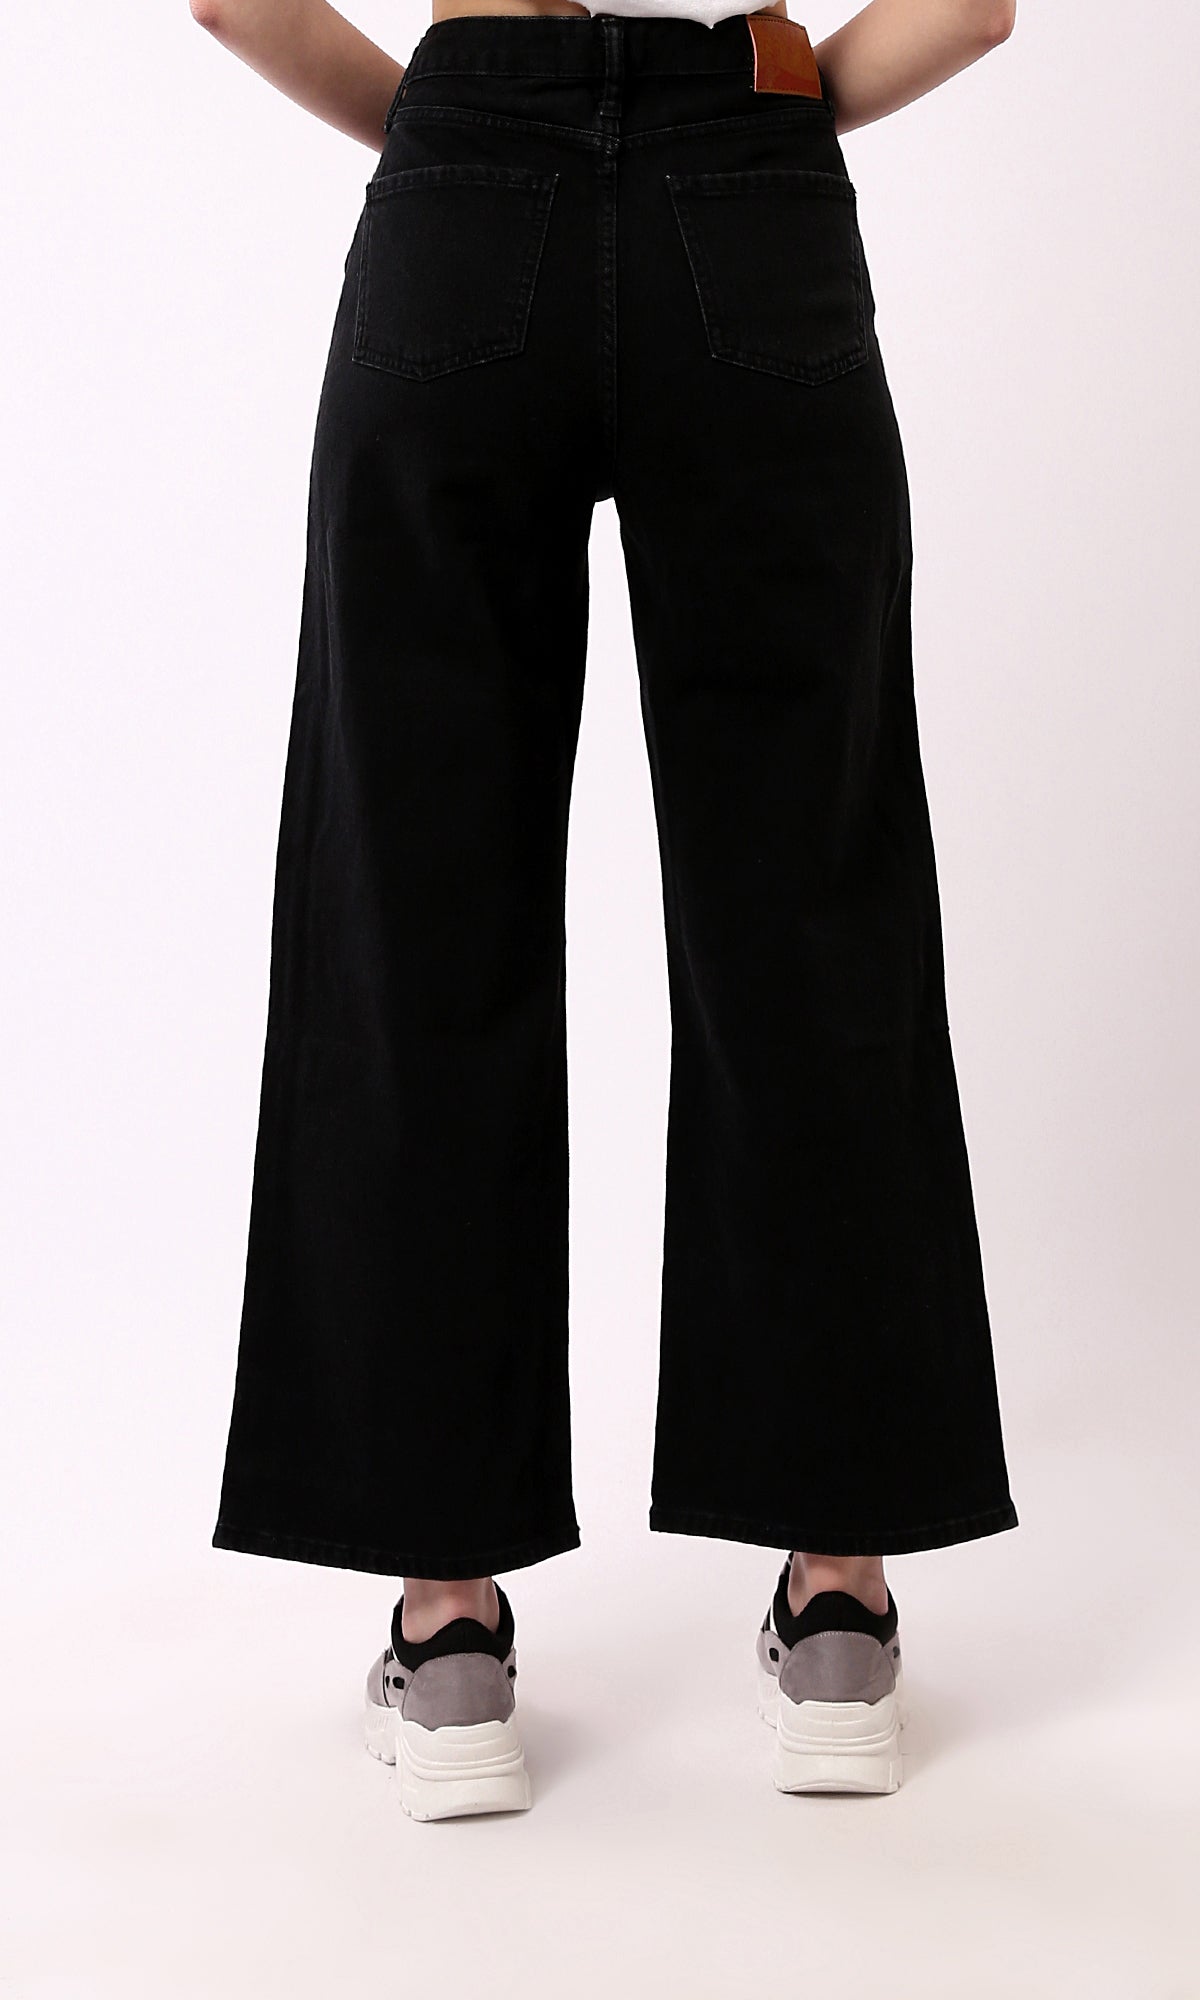 O183103 Wide Leg Solid Black Buttoned Jeans